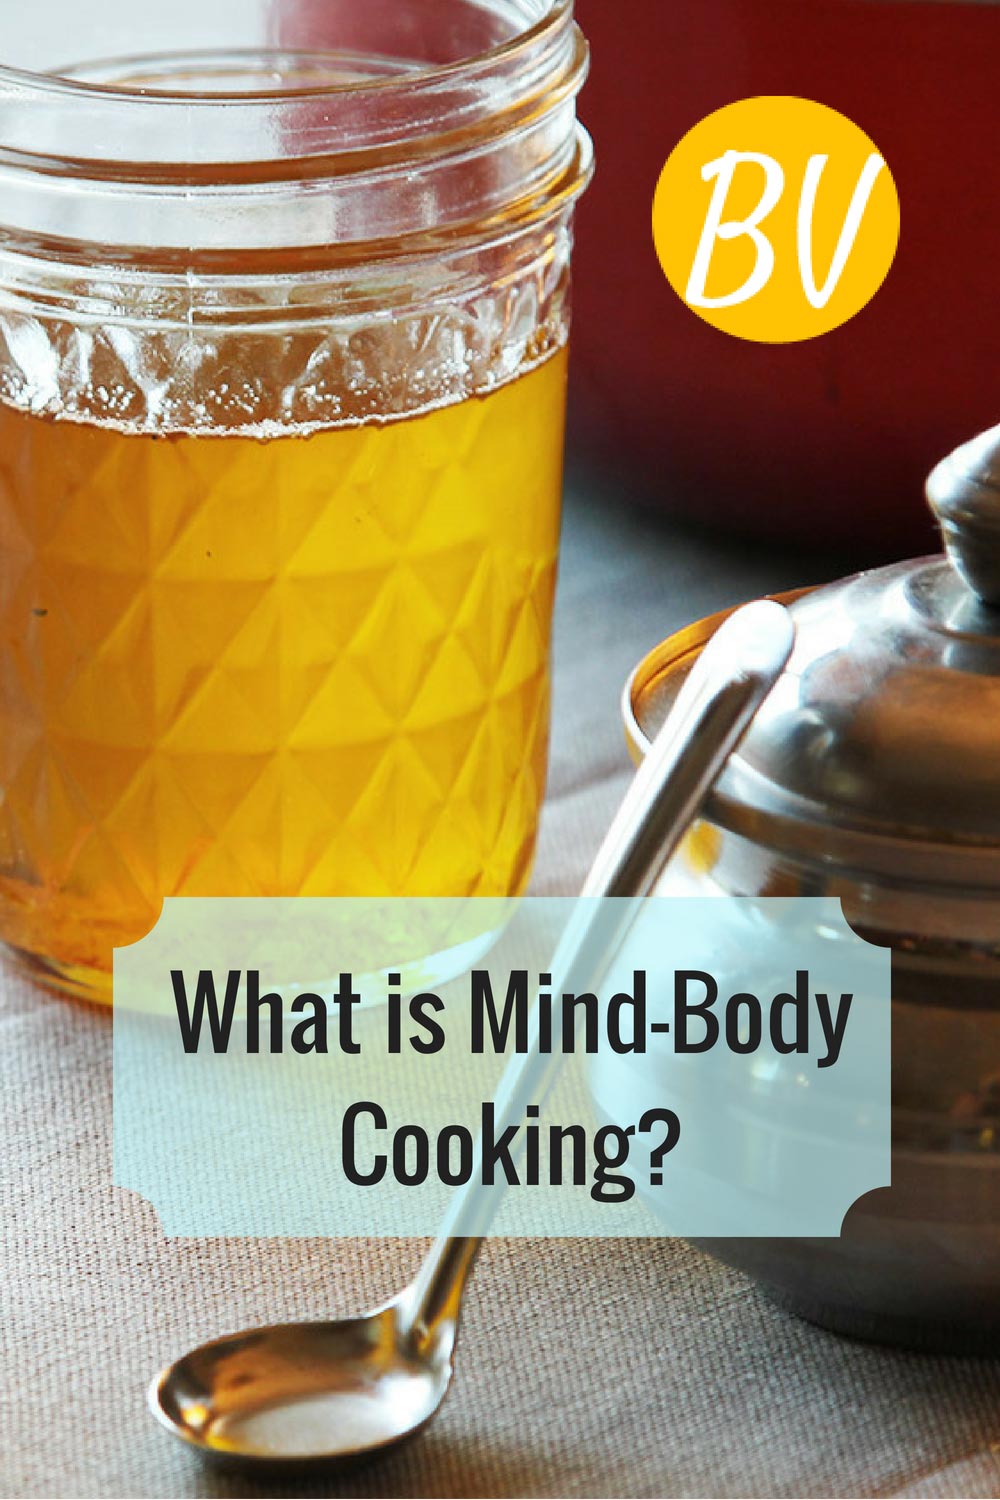 What Is Mind-Body Cooking?